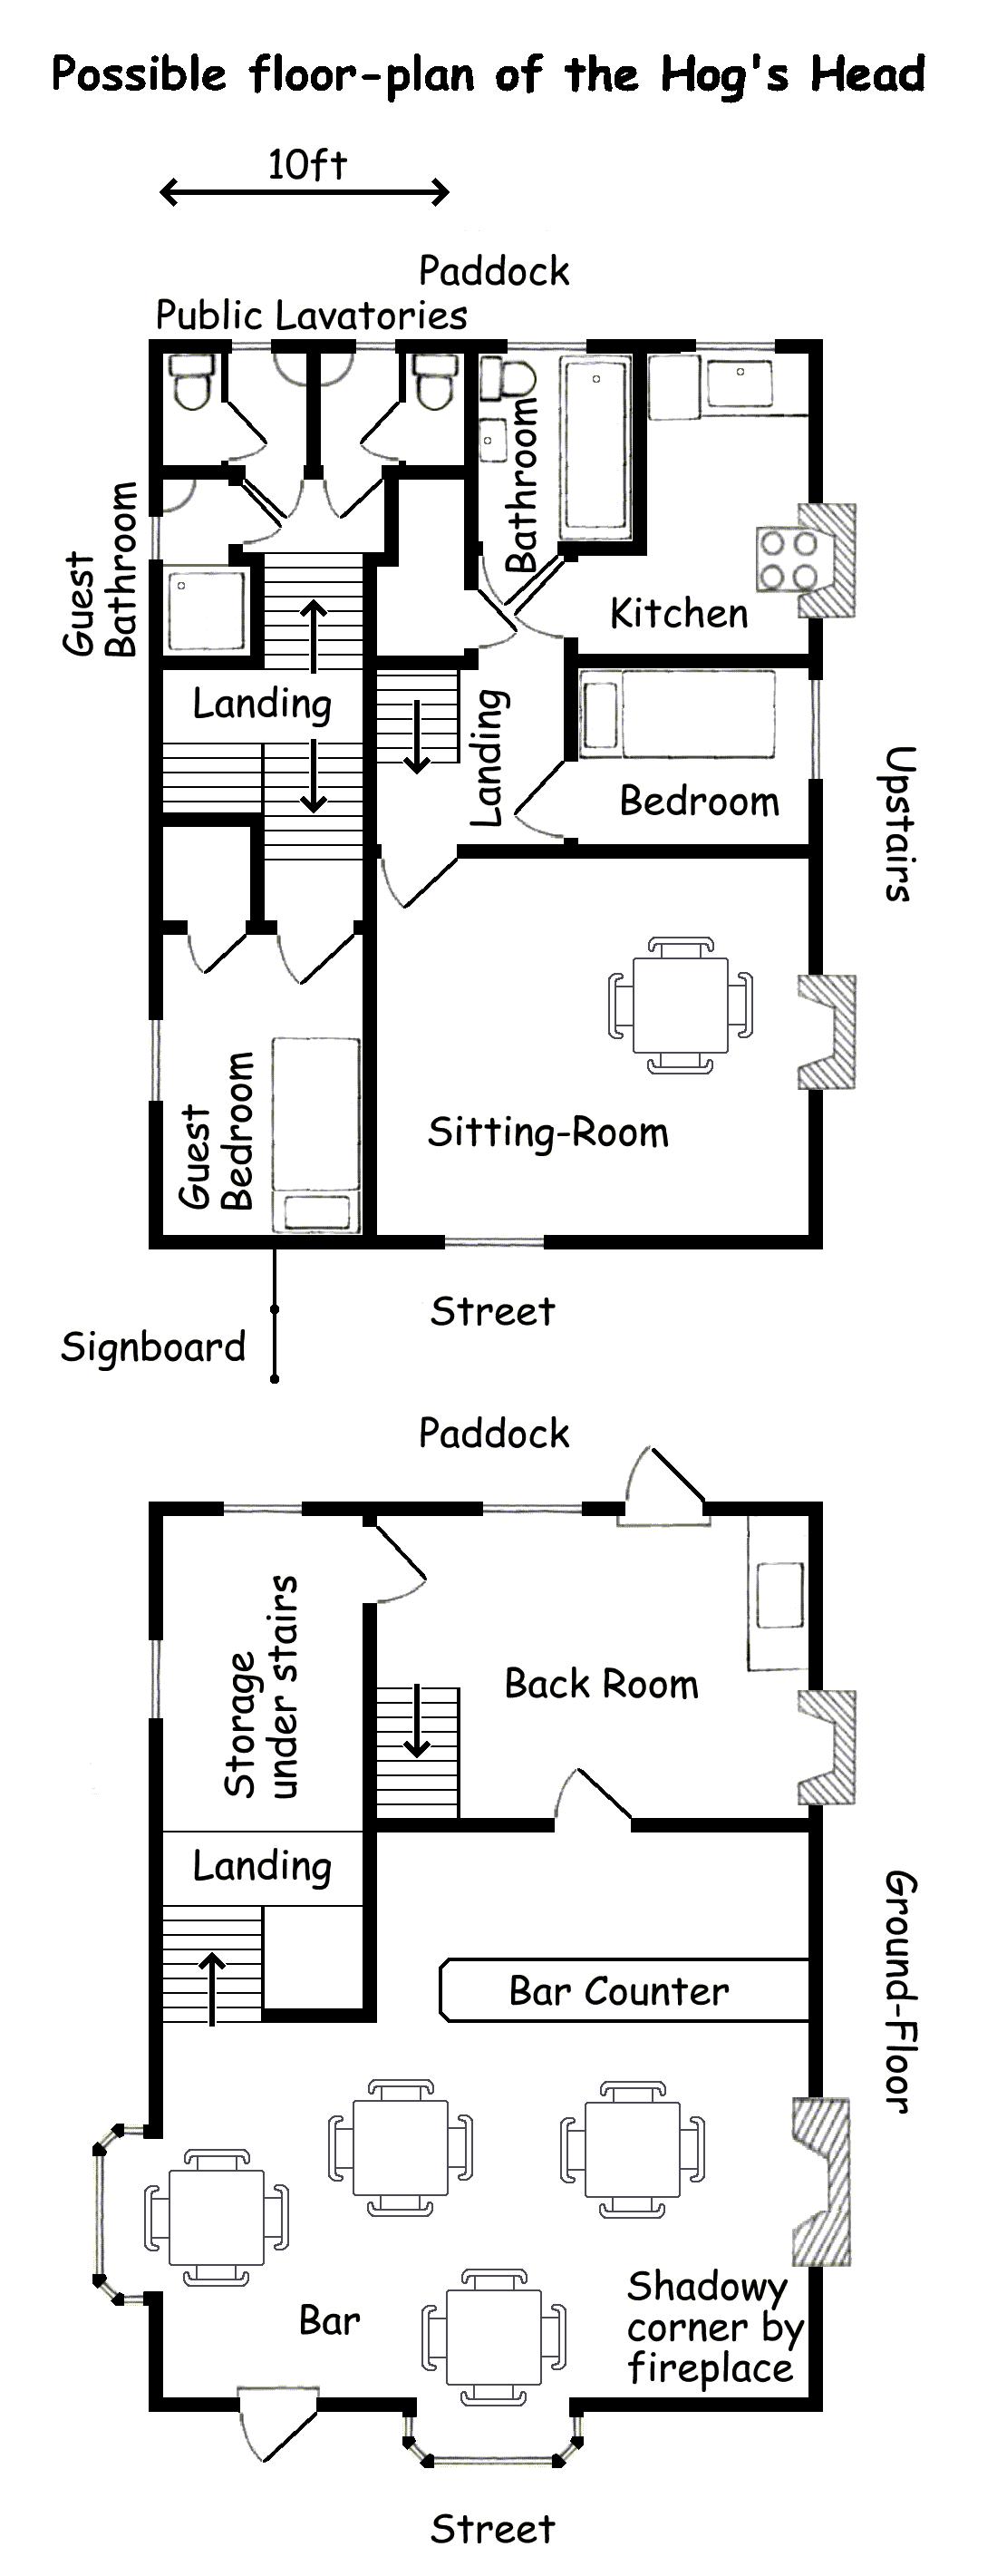 floor-plan of small pub with public lavatories and a room to let